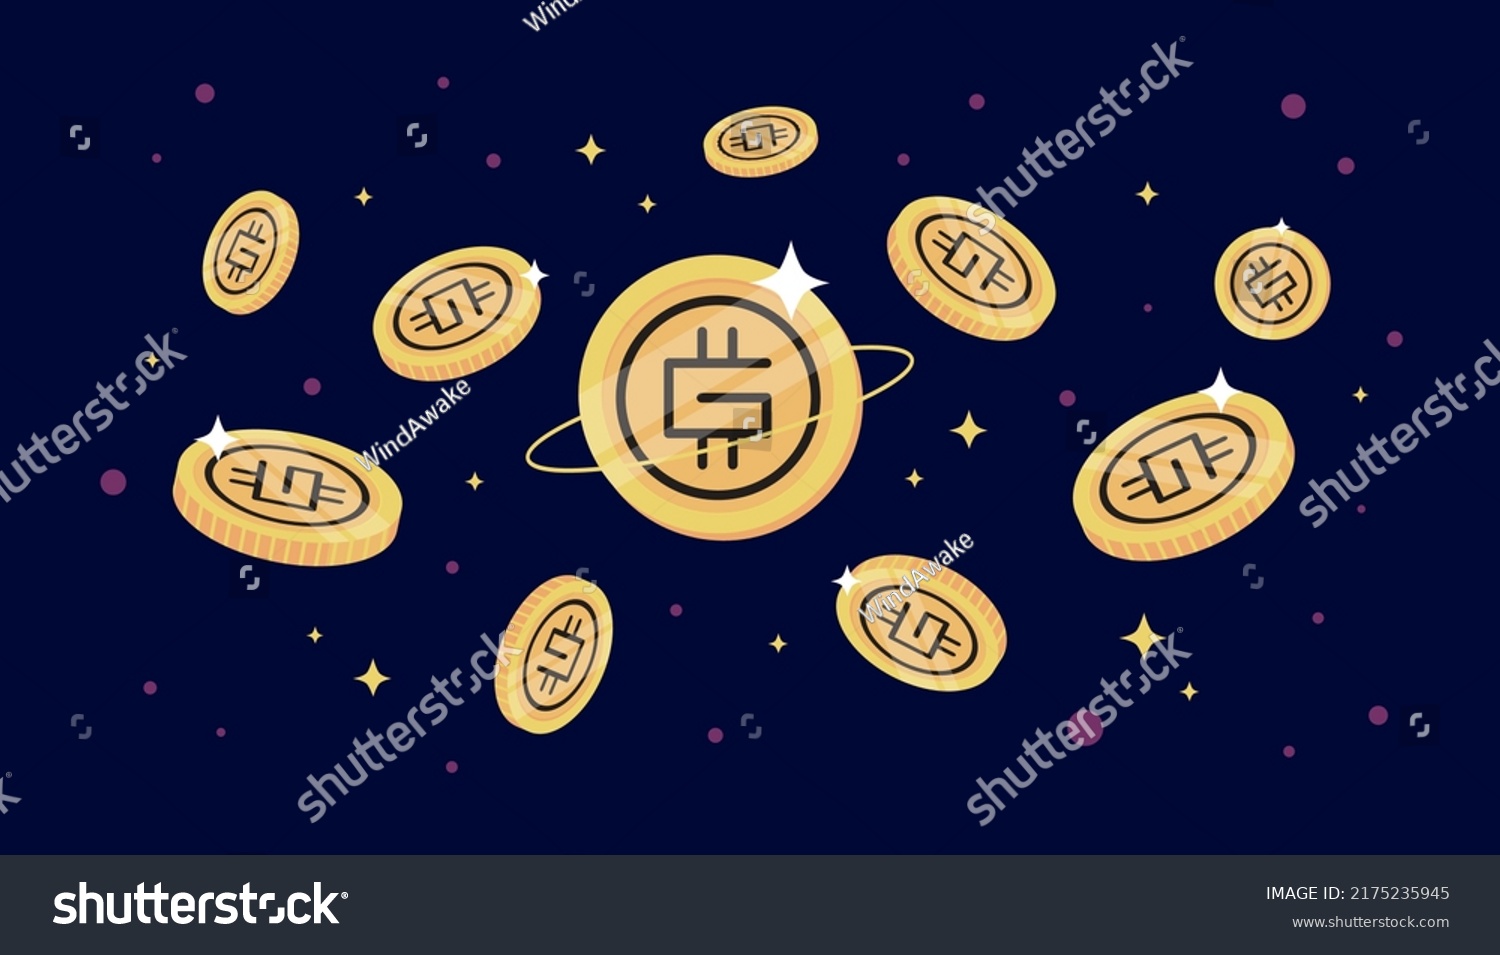 SVG of Green metaverse token (GMT) coins falling from the sky. GMT cryptocurrency concept banner background. svg